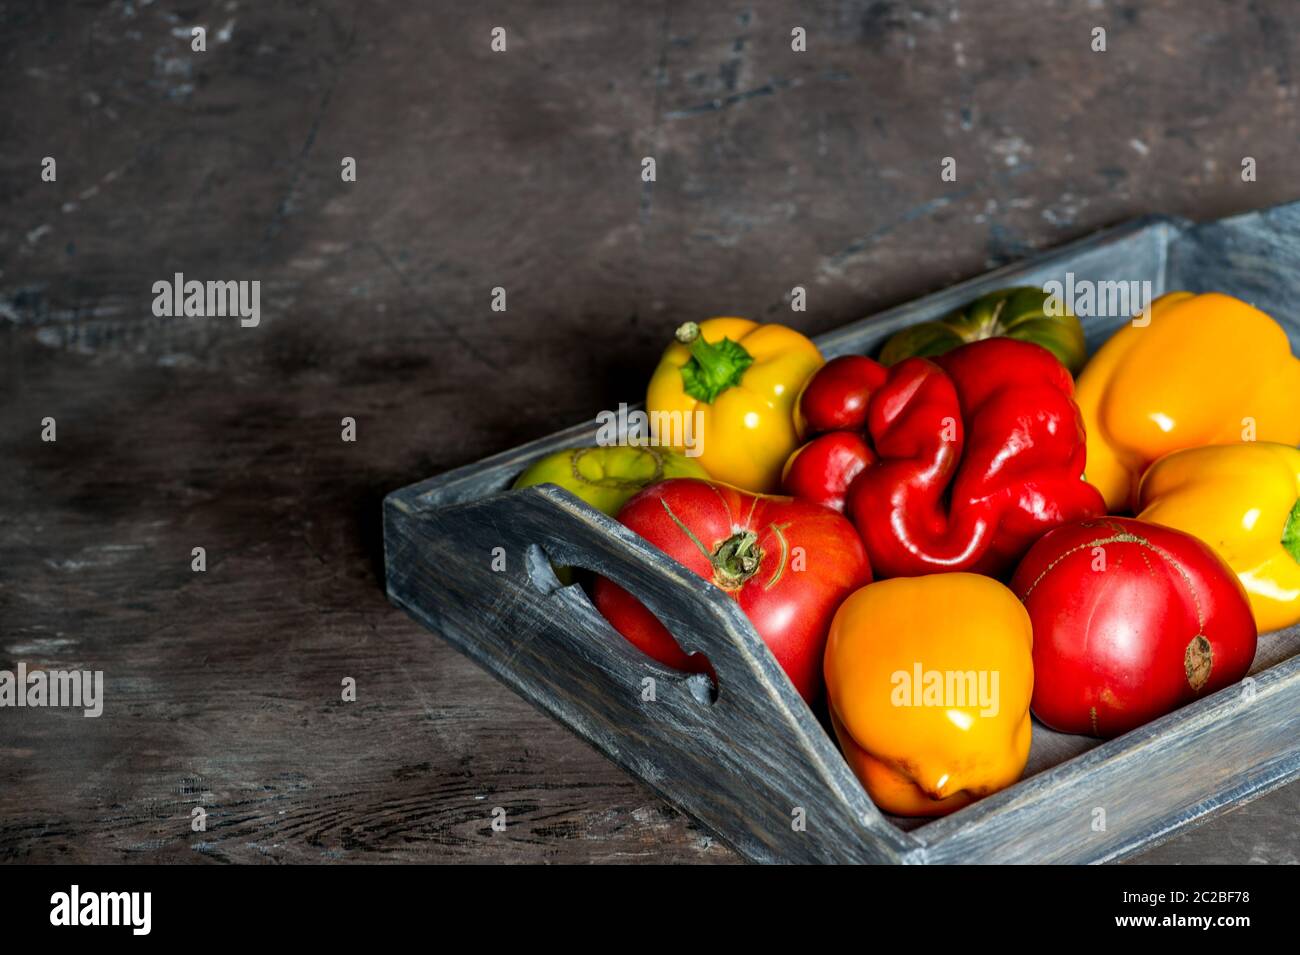 Imperfect natural peppers and tomatoes on an old wooden tray on a dark background. Copy Space. Stock Photo